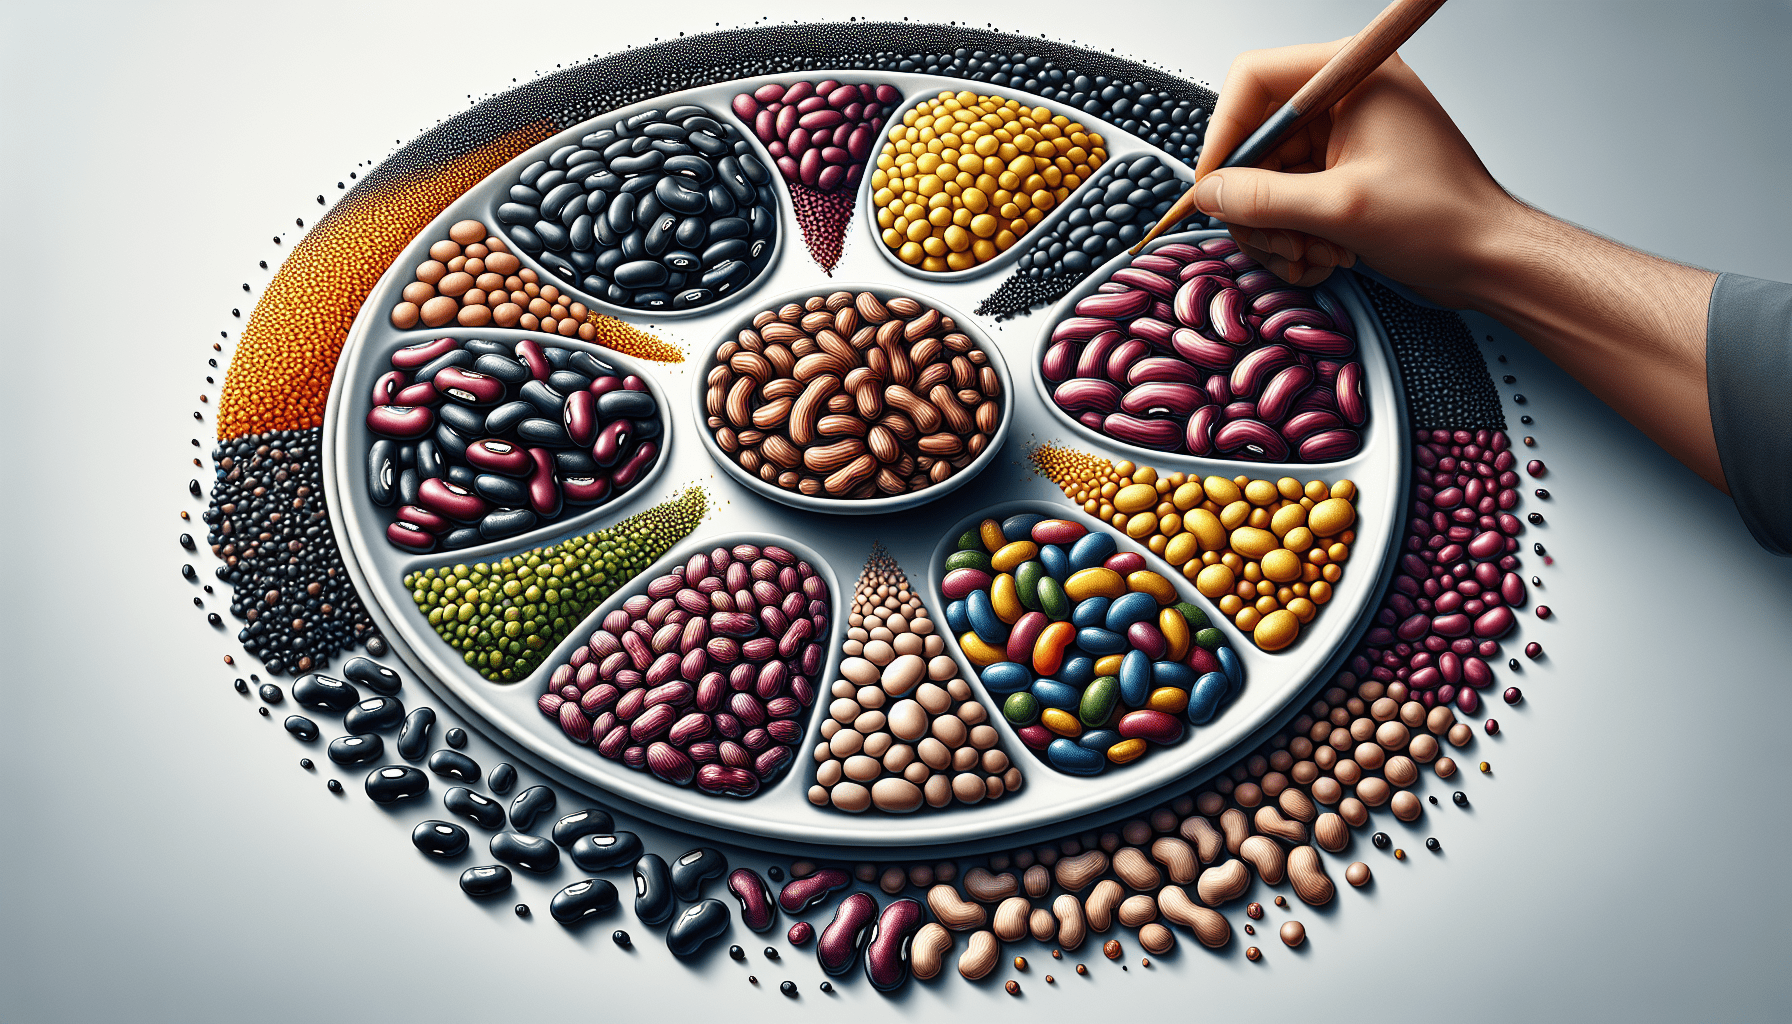 13 are there any anti inflammatory properties associated with consuming beans